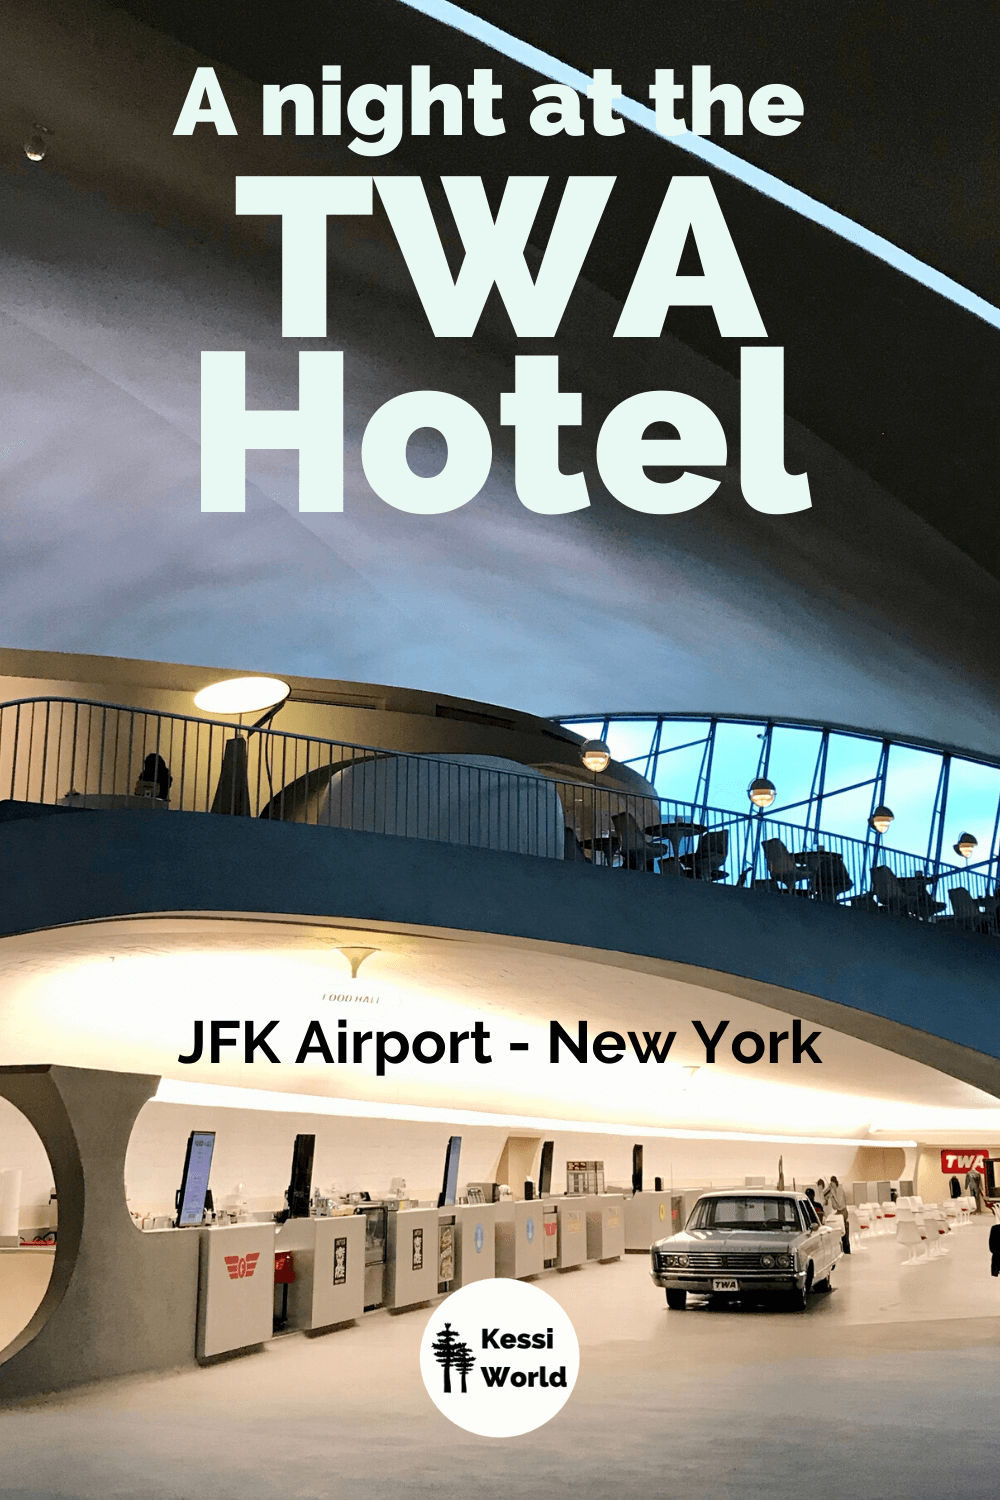 The ticketing lobby at the entrance to the TWA Hotel at JFK Airport in New York City. A 1960's era car is parked along a row of vintage ticketing kiosks featuring the gentle lines of the Aero Saarinen designed airline terminal.